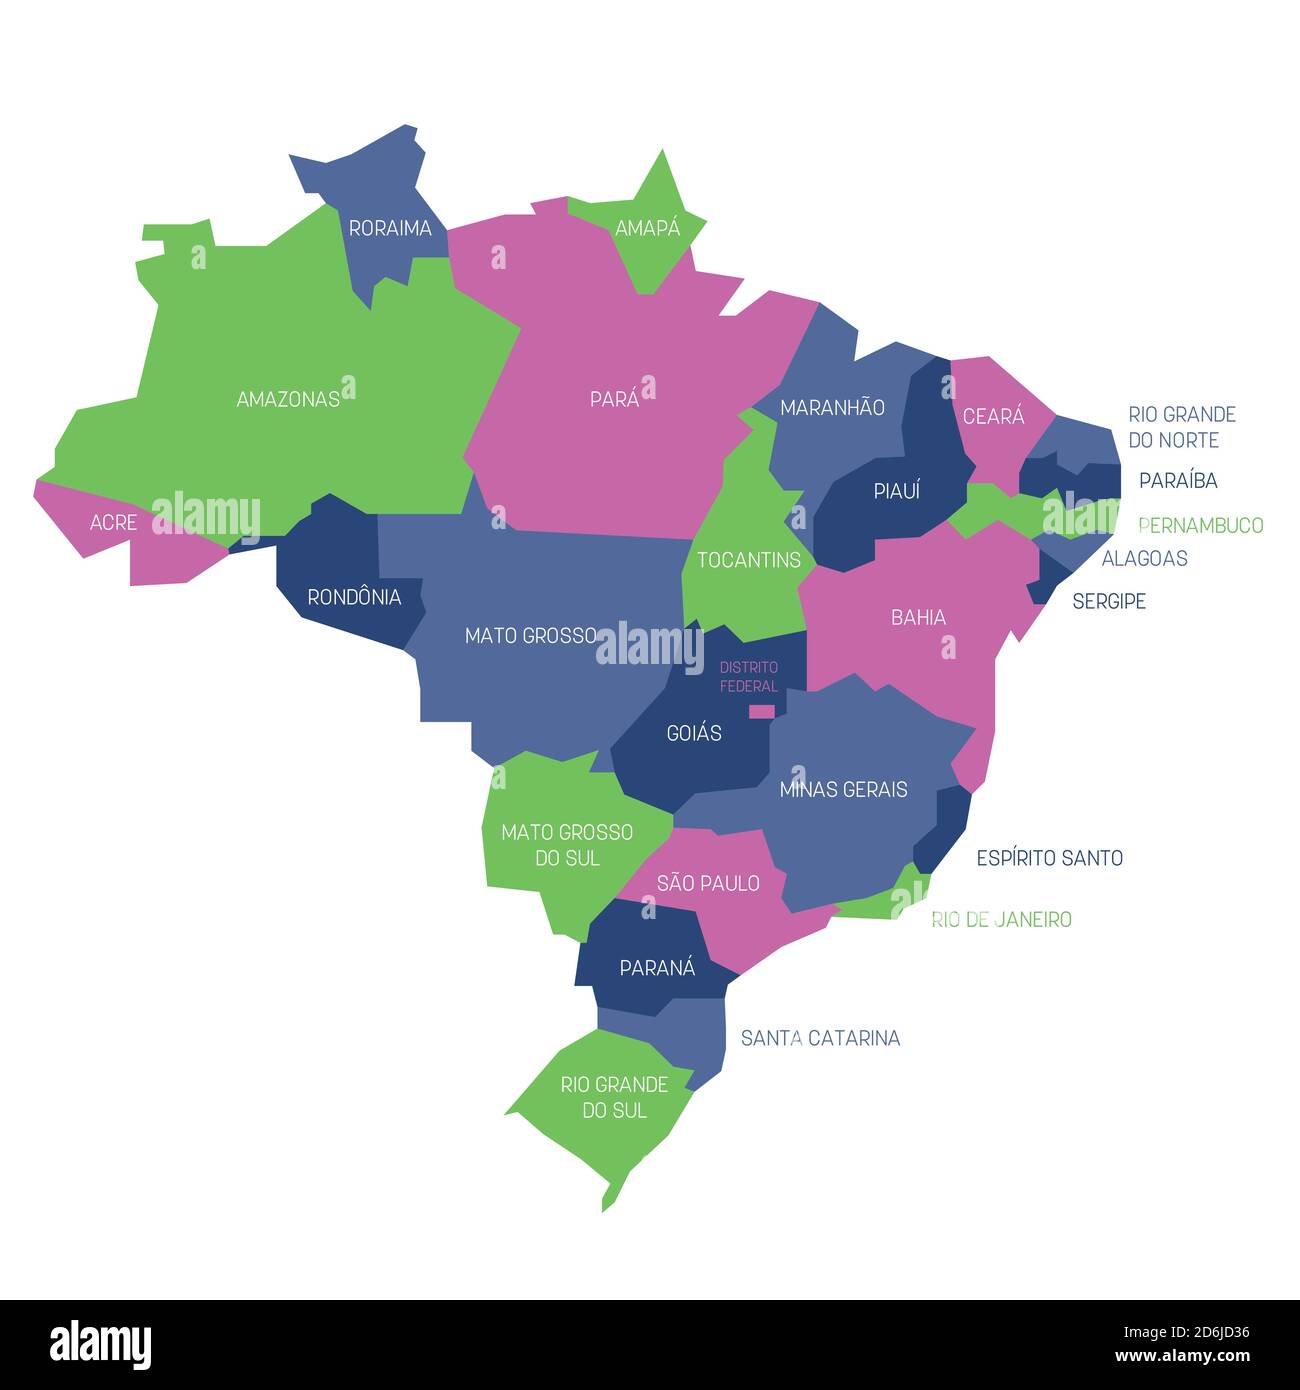 Colorful political map of Brazil. Administrative divisions - states. Simple flat vector map with labels. Stock Vector